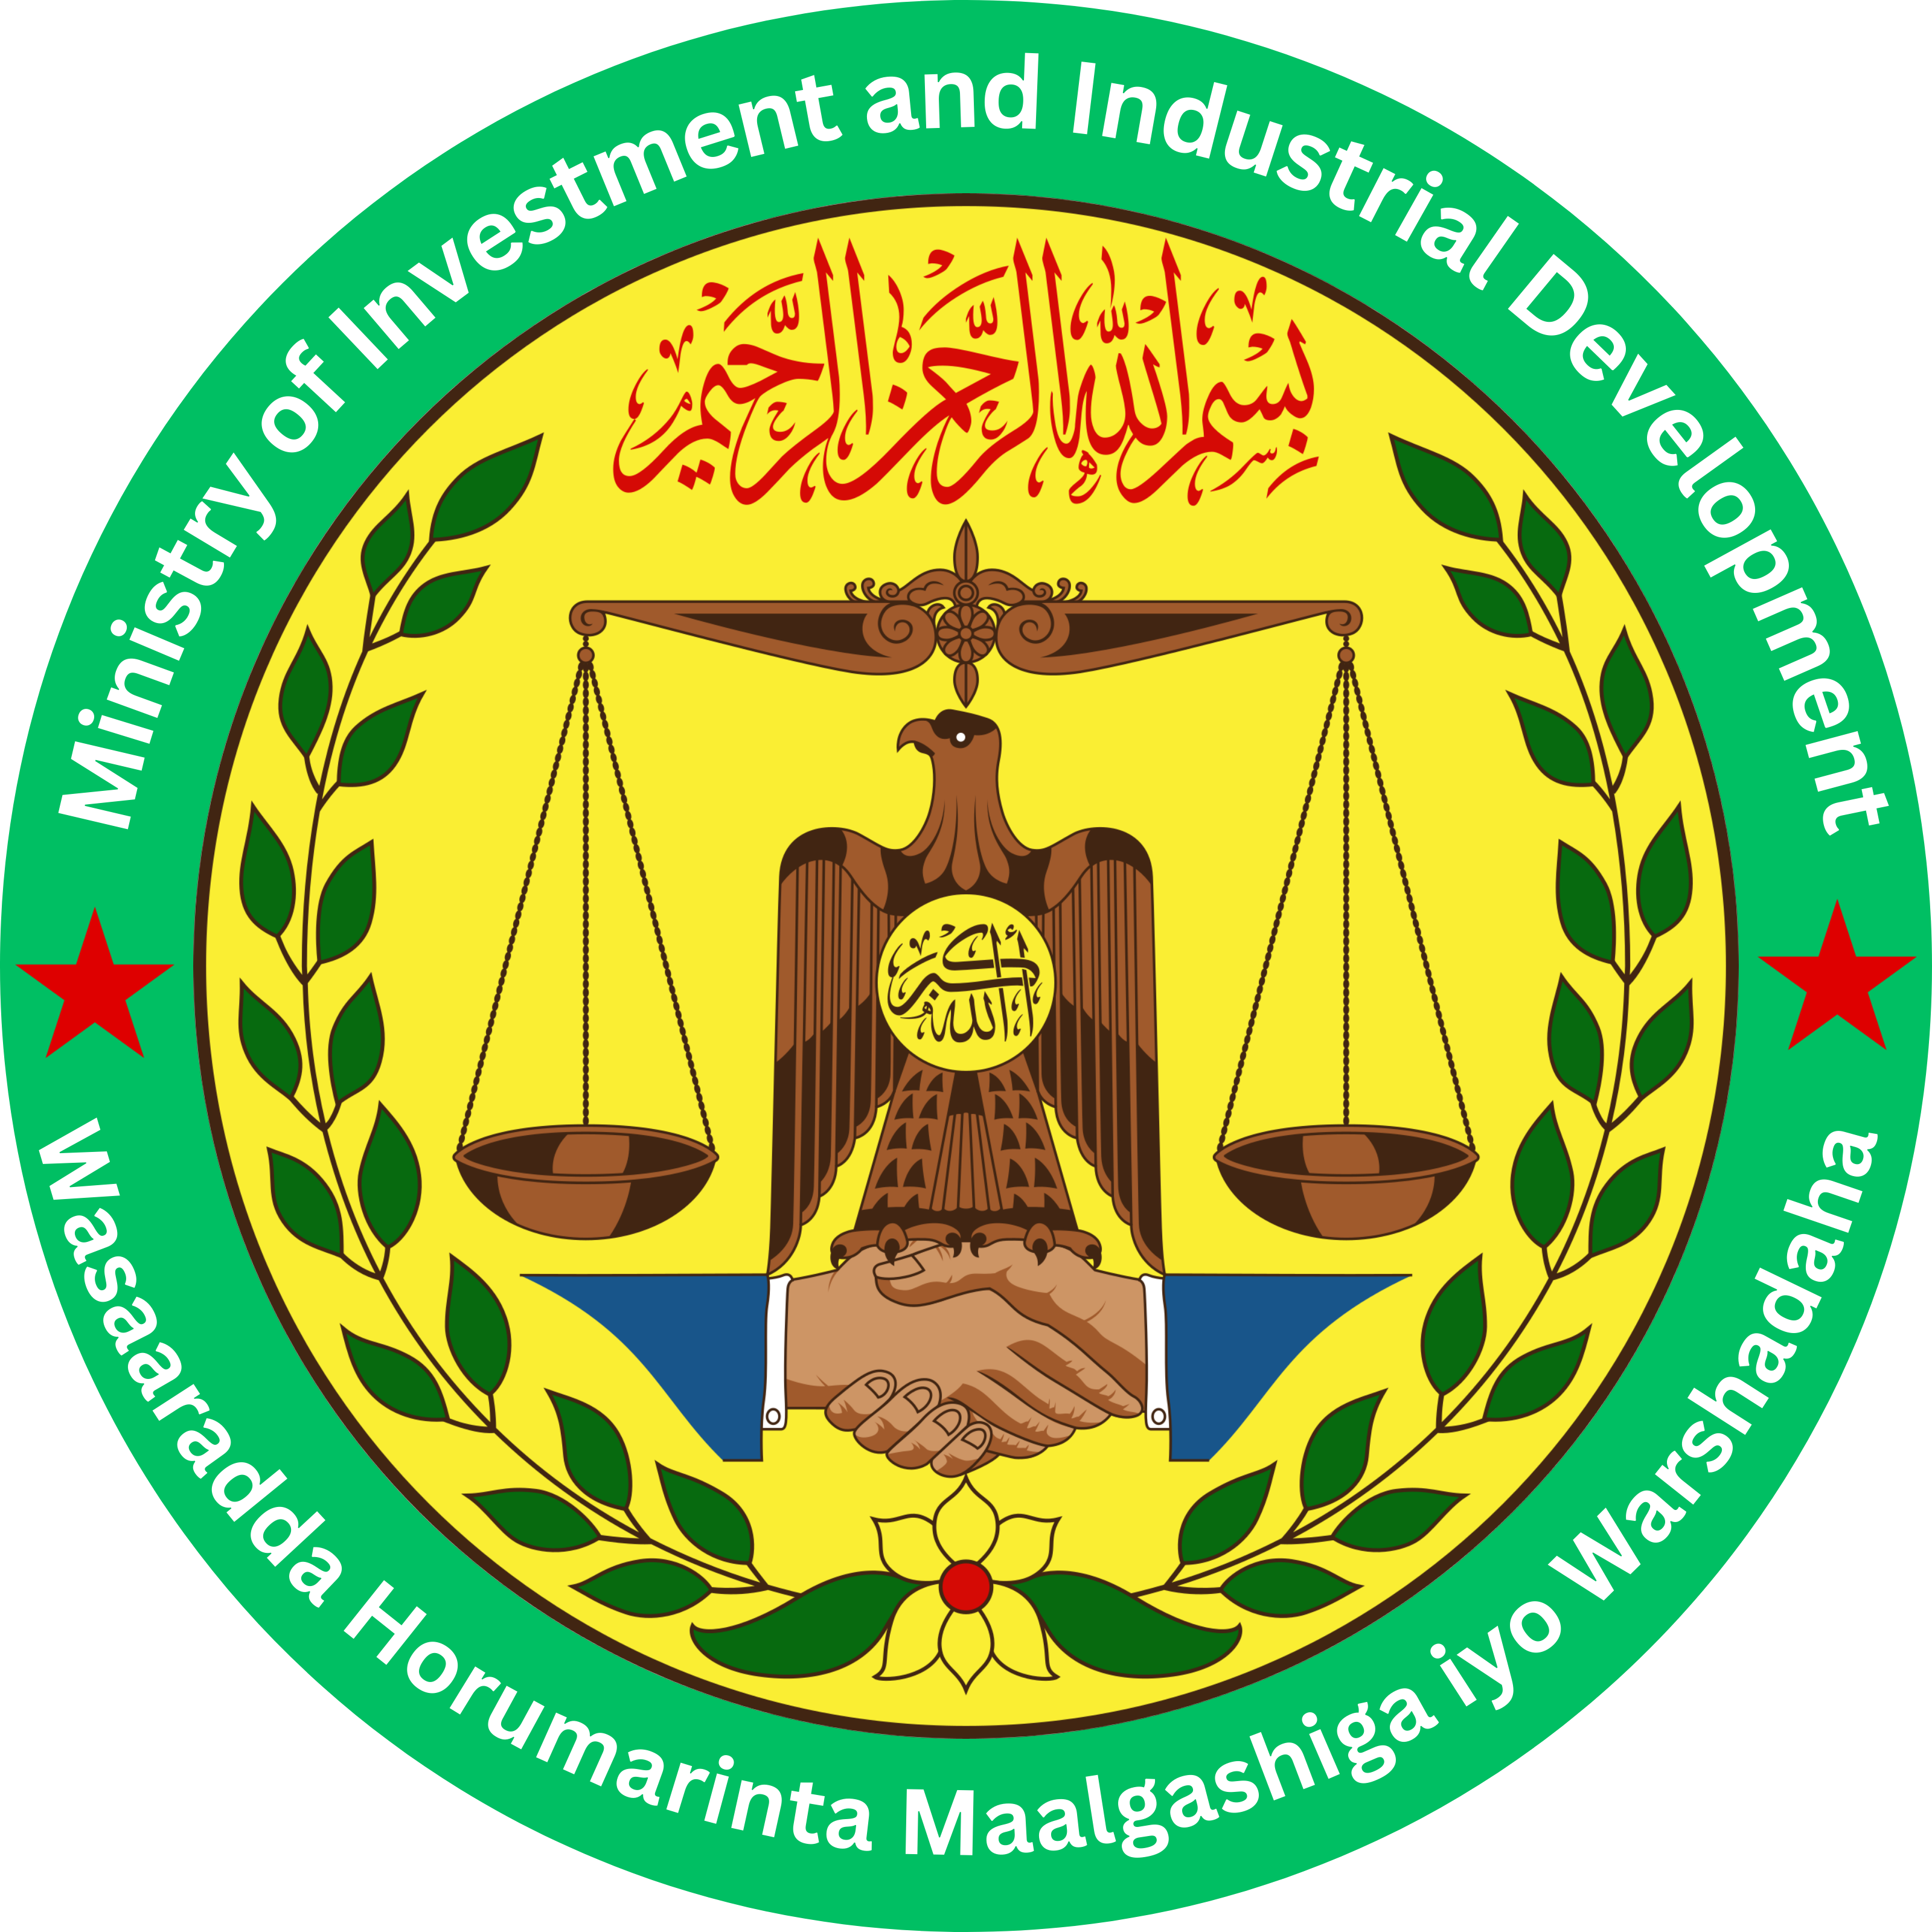 Ministry of Investment and Industrial Development